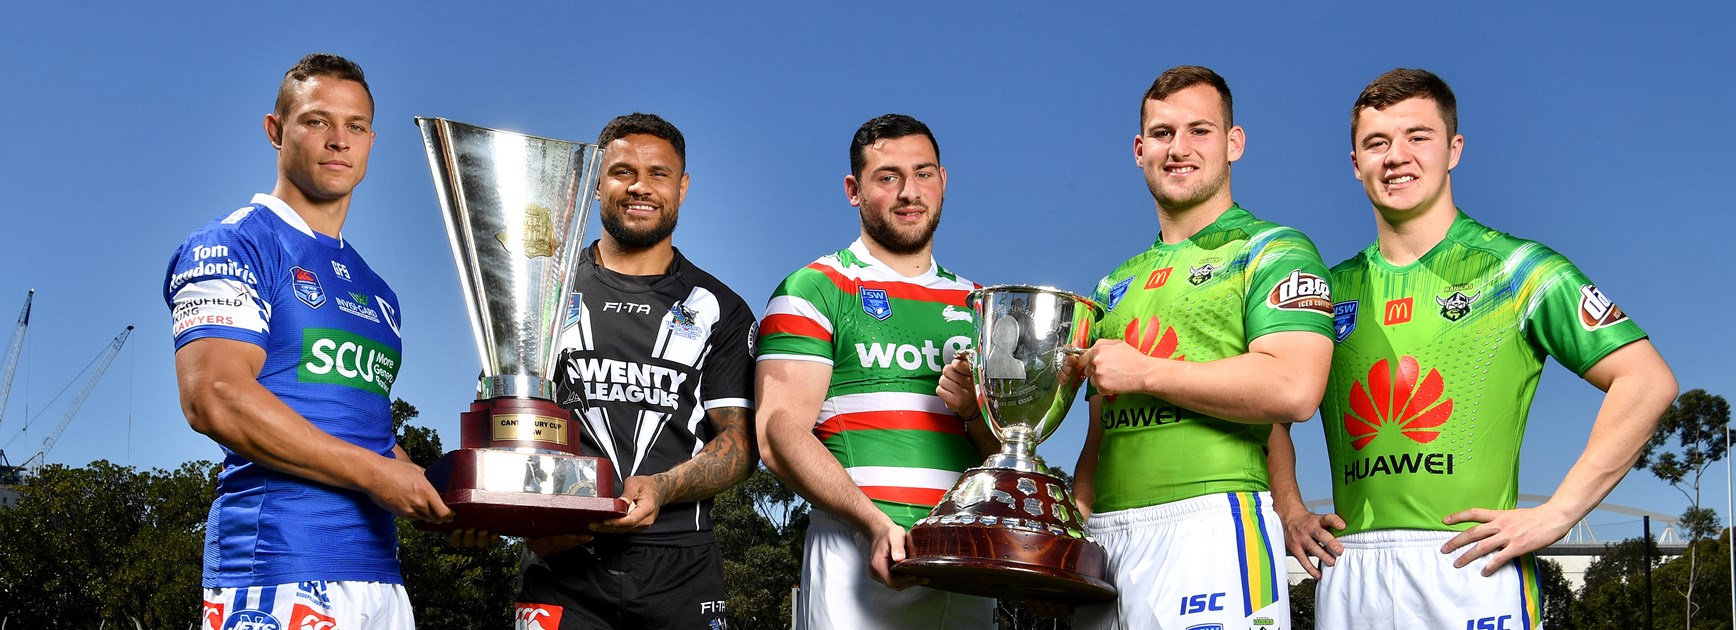 How to watch 2019 NSWRL Grand Finals